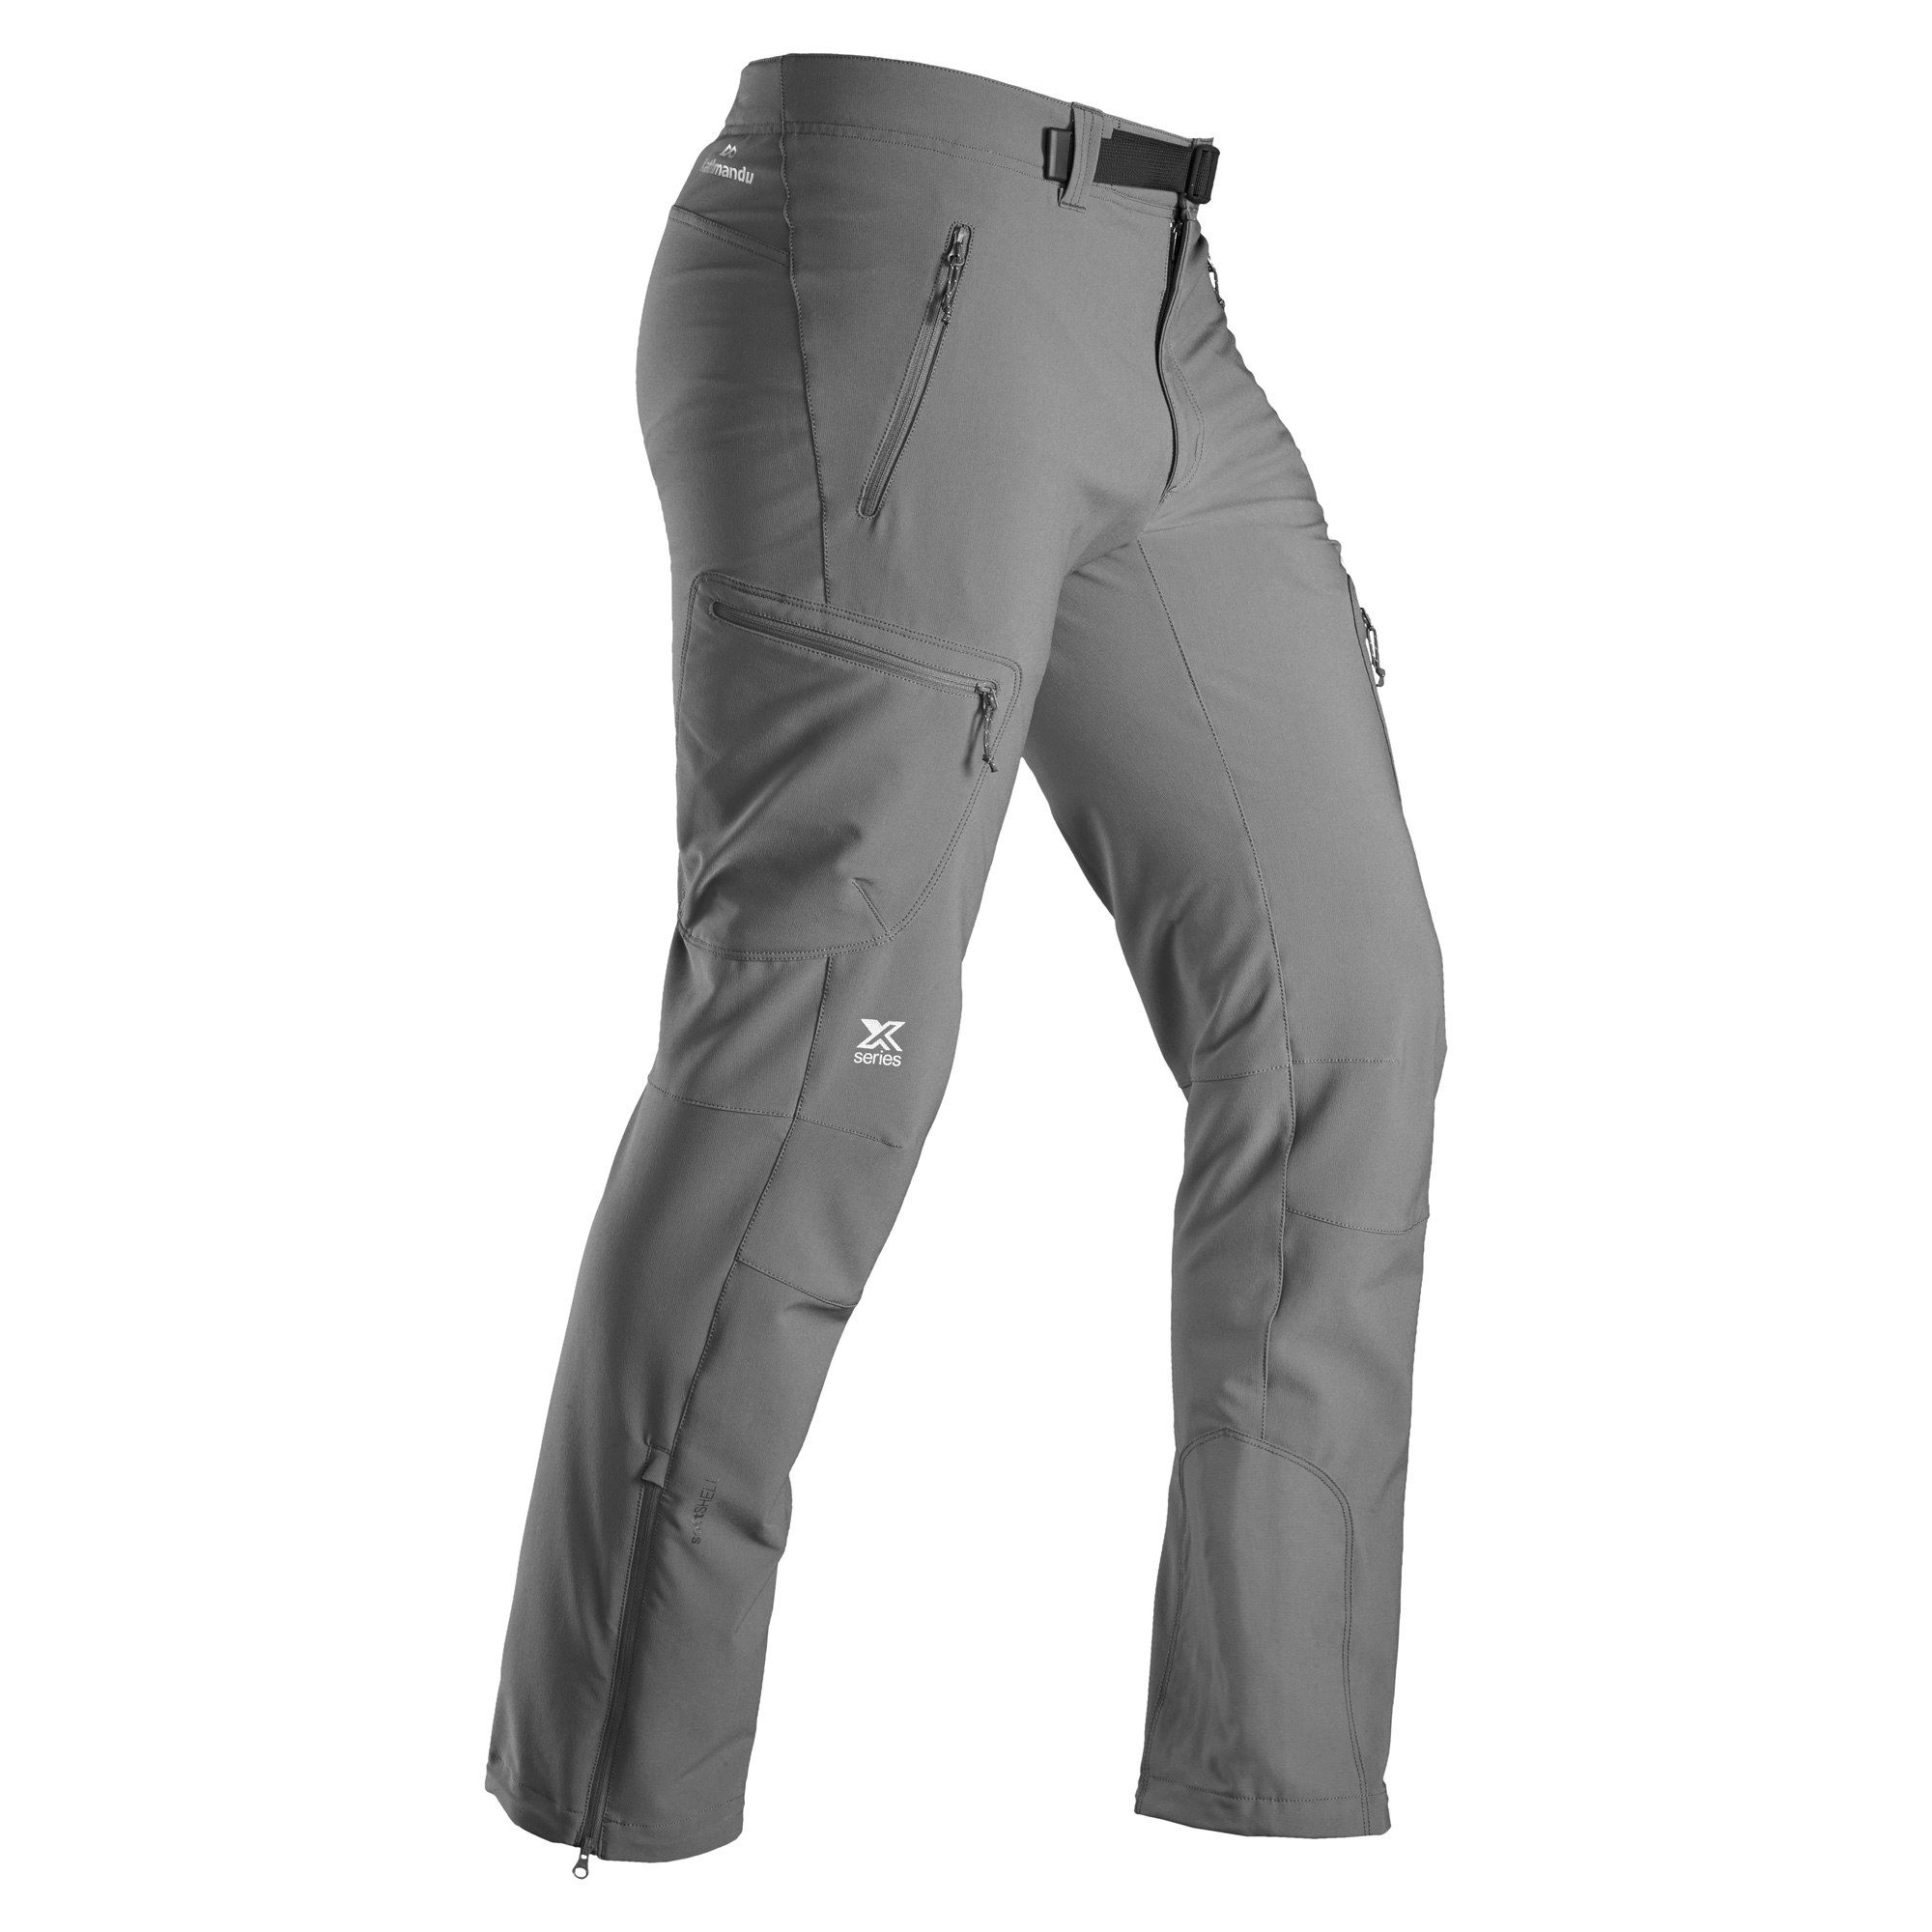 Mountainskin 6XL Men's Summer Quick Dry Pants Outdoor Male